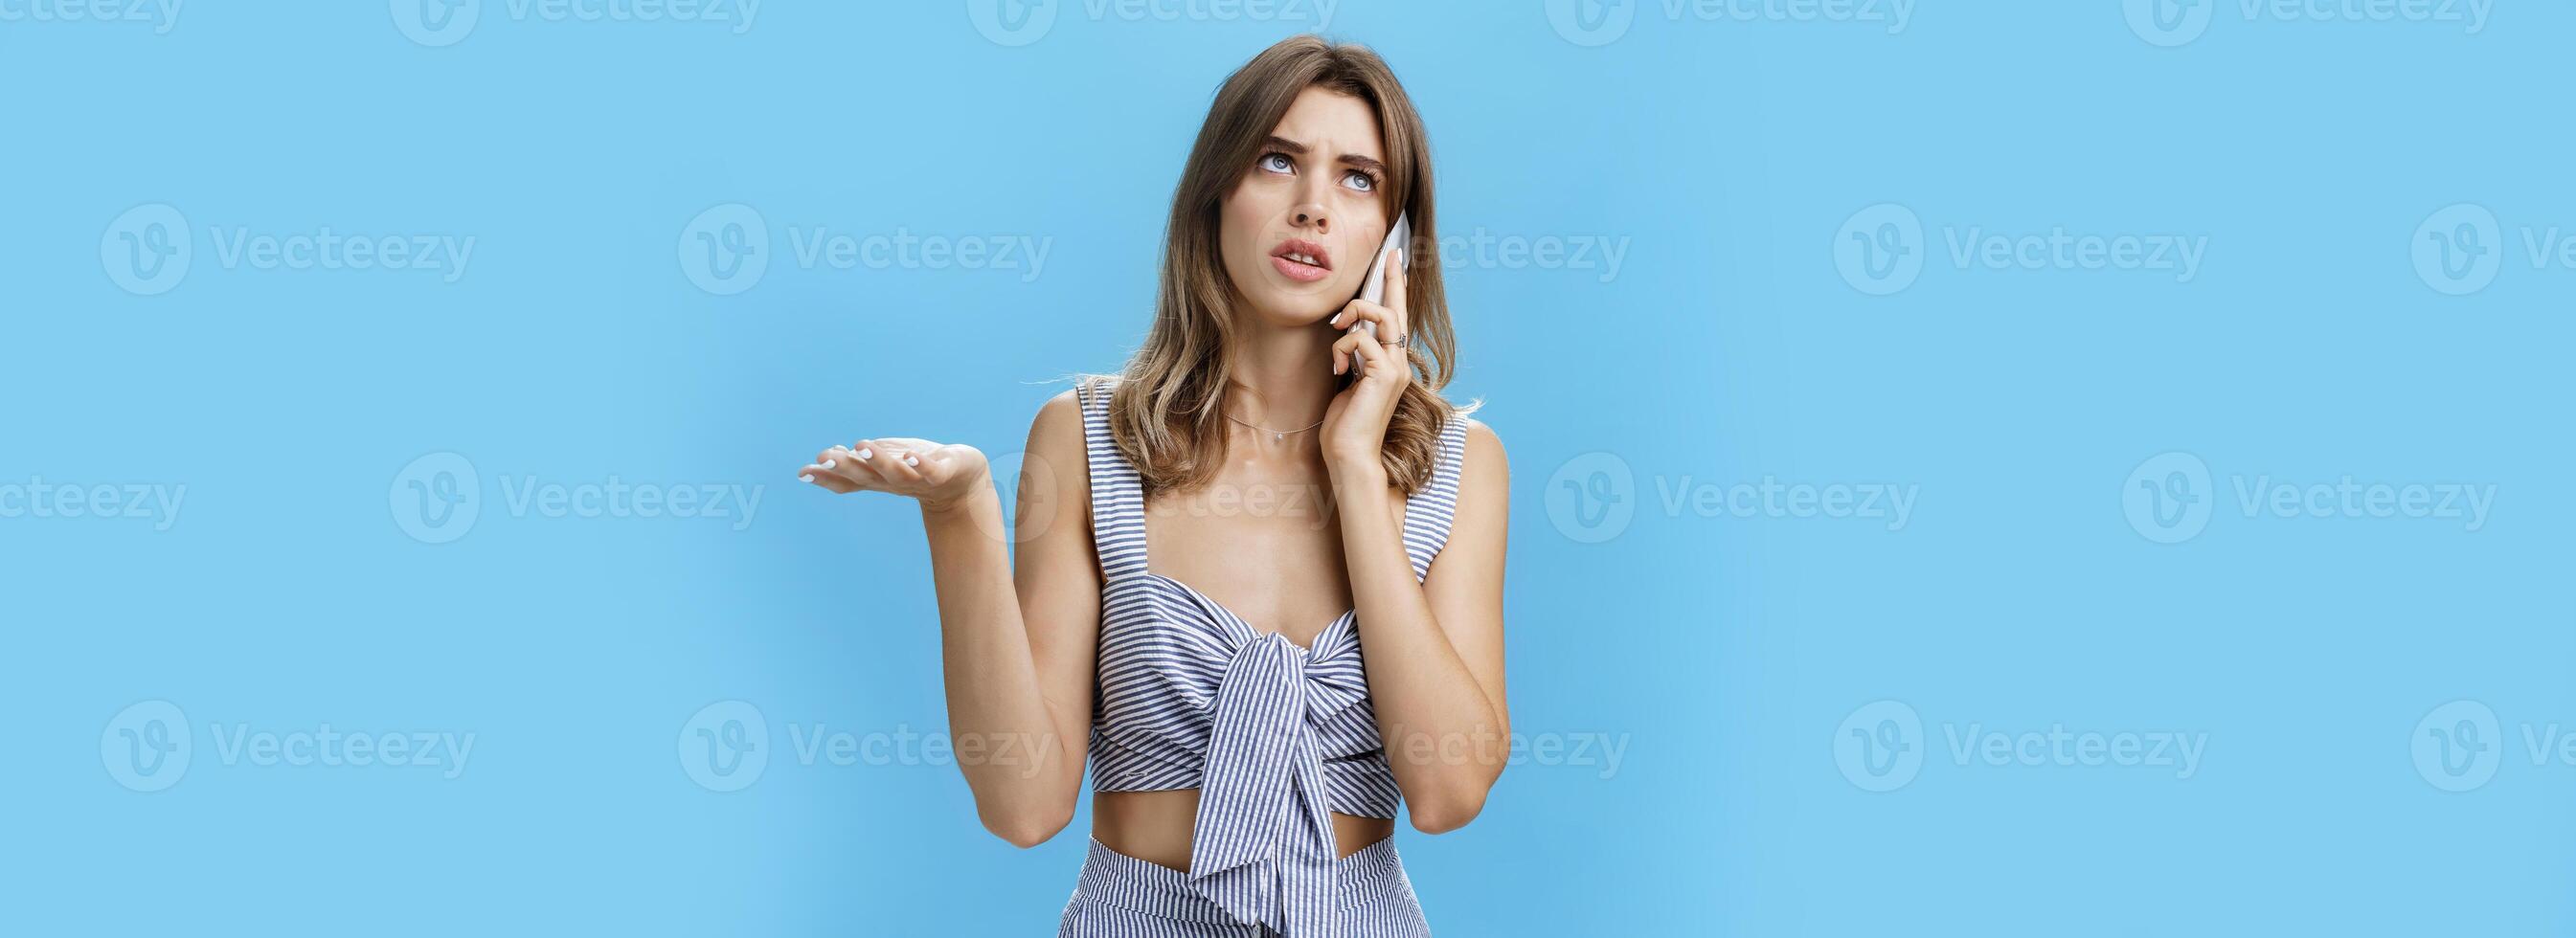 Waist-up shot of perplexed and confused cute girlfriend in matching outfit making shoulder shrug and raising palm in clueless gesture looking up while talking on phone cannot understand what answer photo